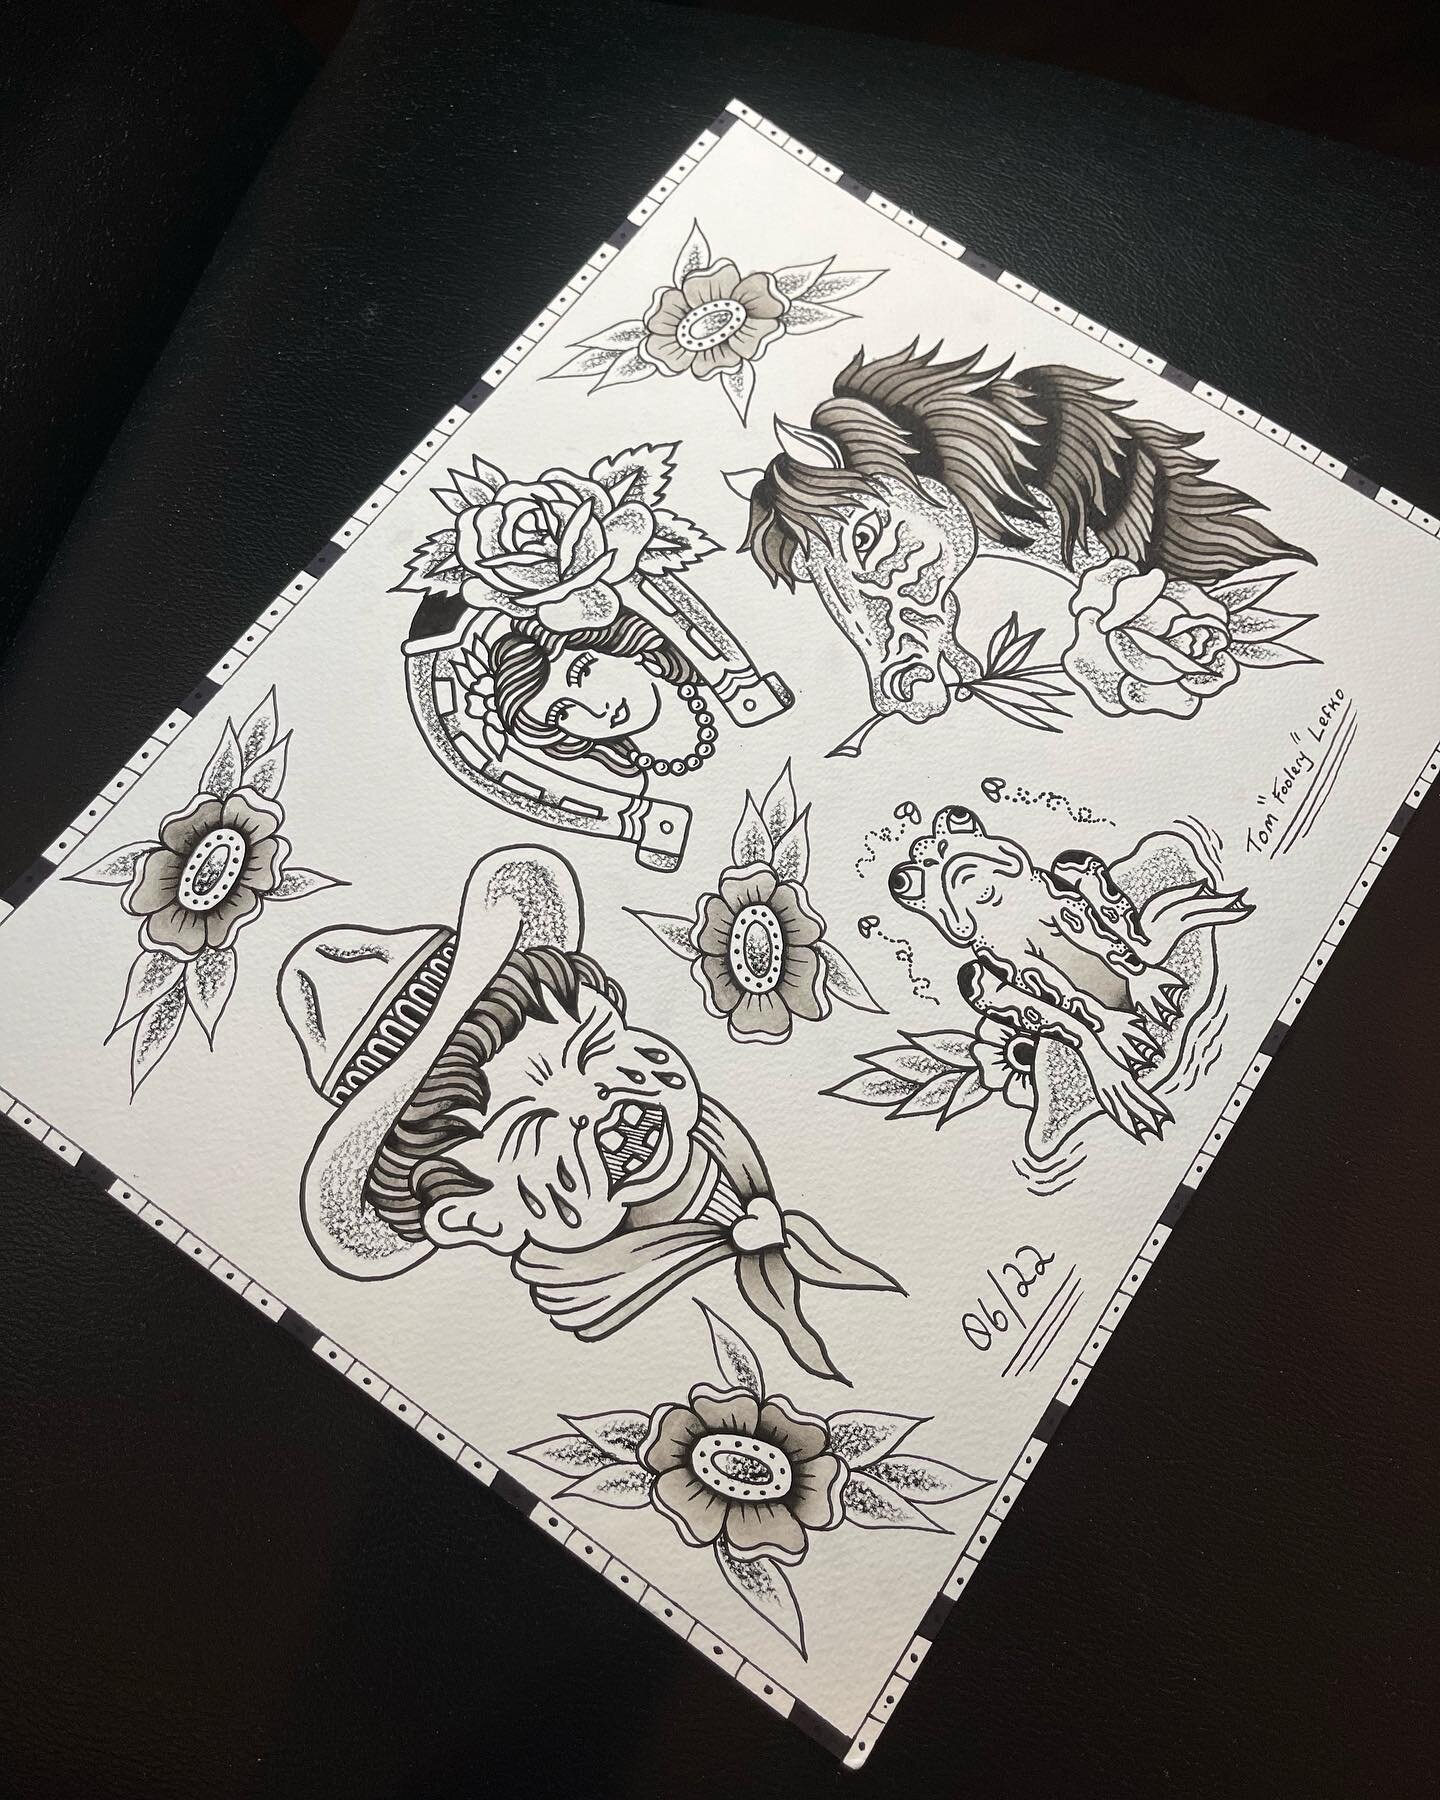 Available designs 🐮
Books never closed! 💥
Link in bio for booking 🌹